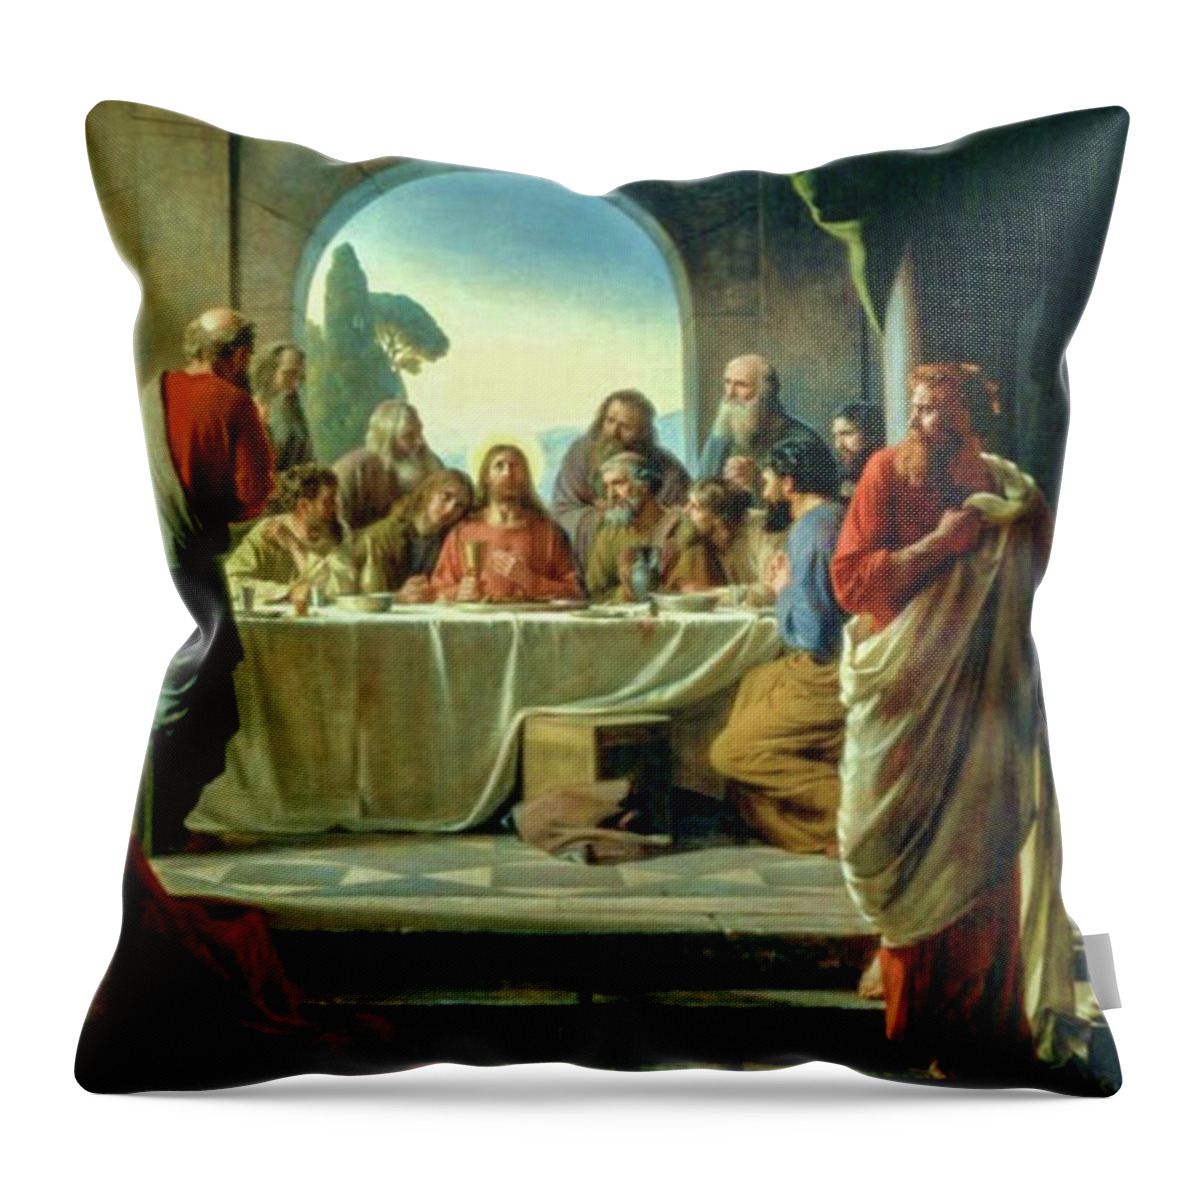 Christian Throw Pillow featuring the painting The Last Supper #1 by Carl Bloch